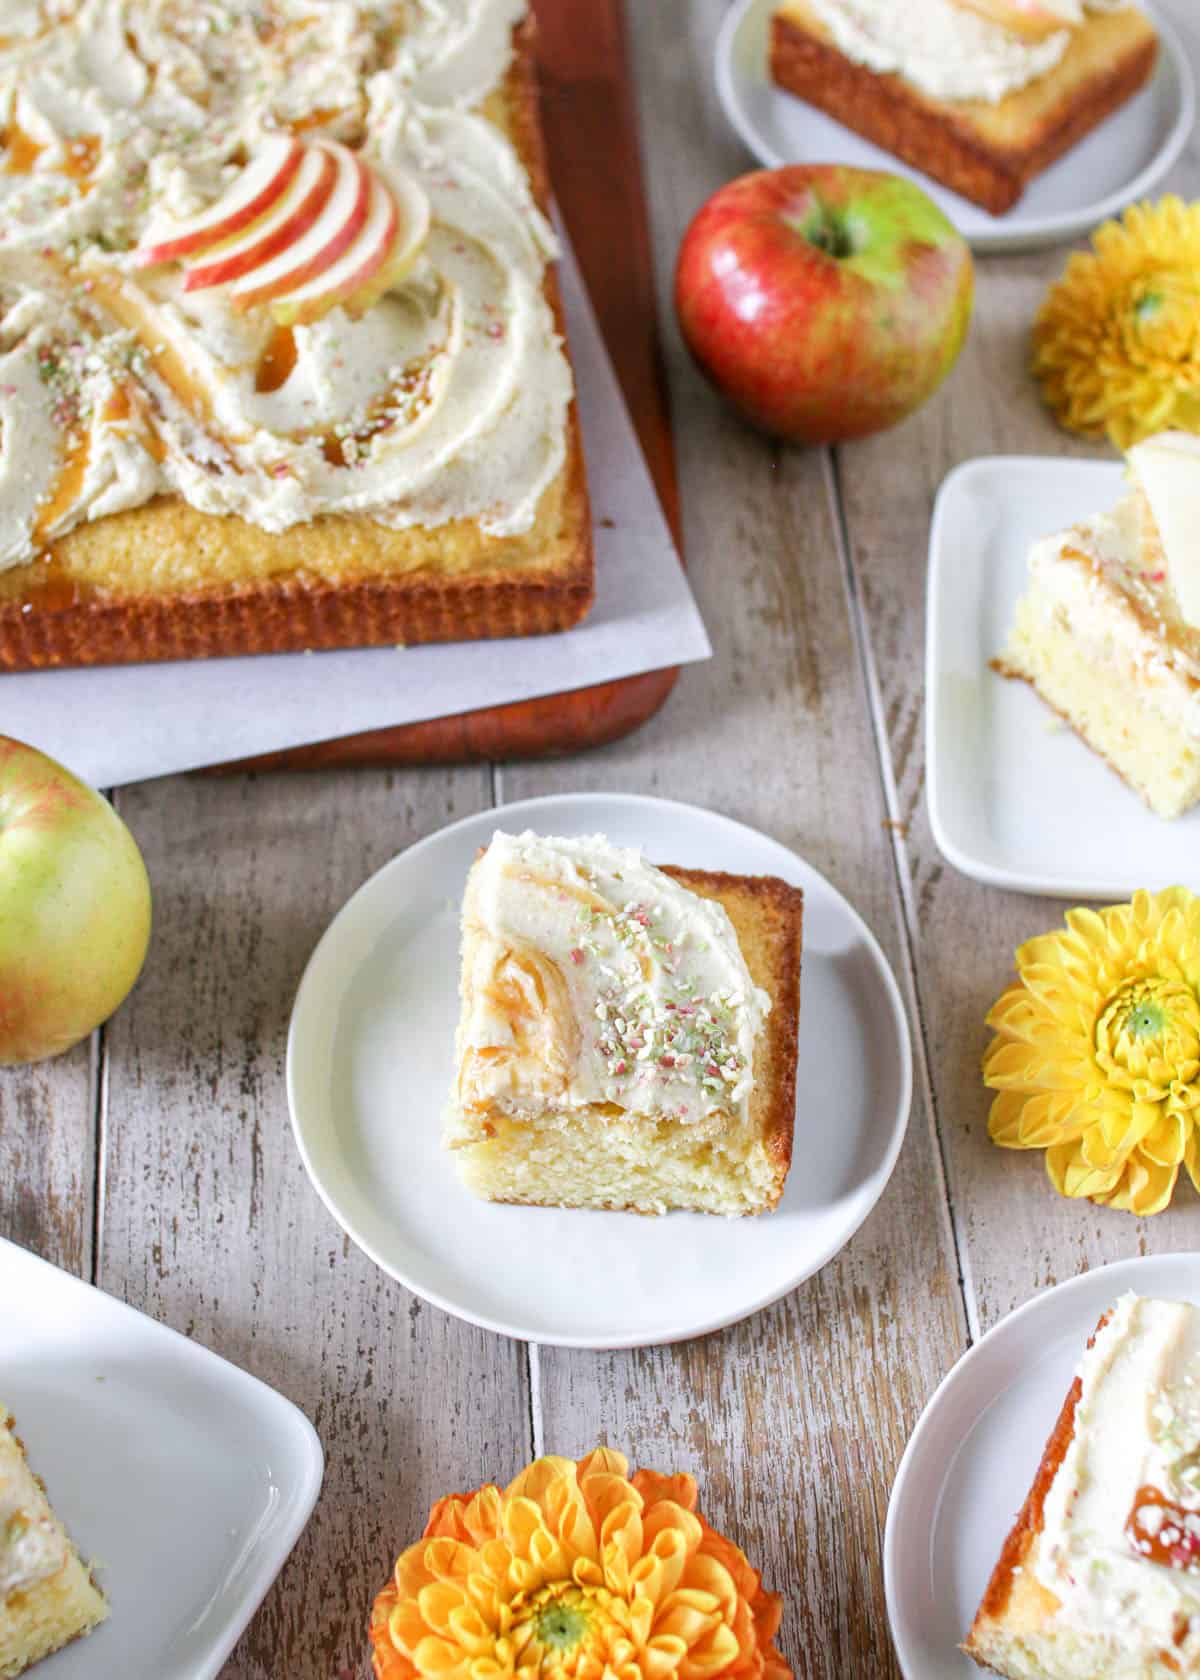 Sliced vanilla cake on small white plates. Each is topped with apple caramel frosting. The plates sit on a wood plank background with whole apples and yellow/orange flowers.